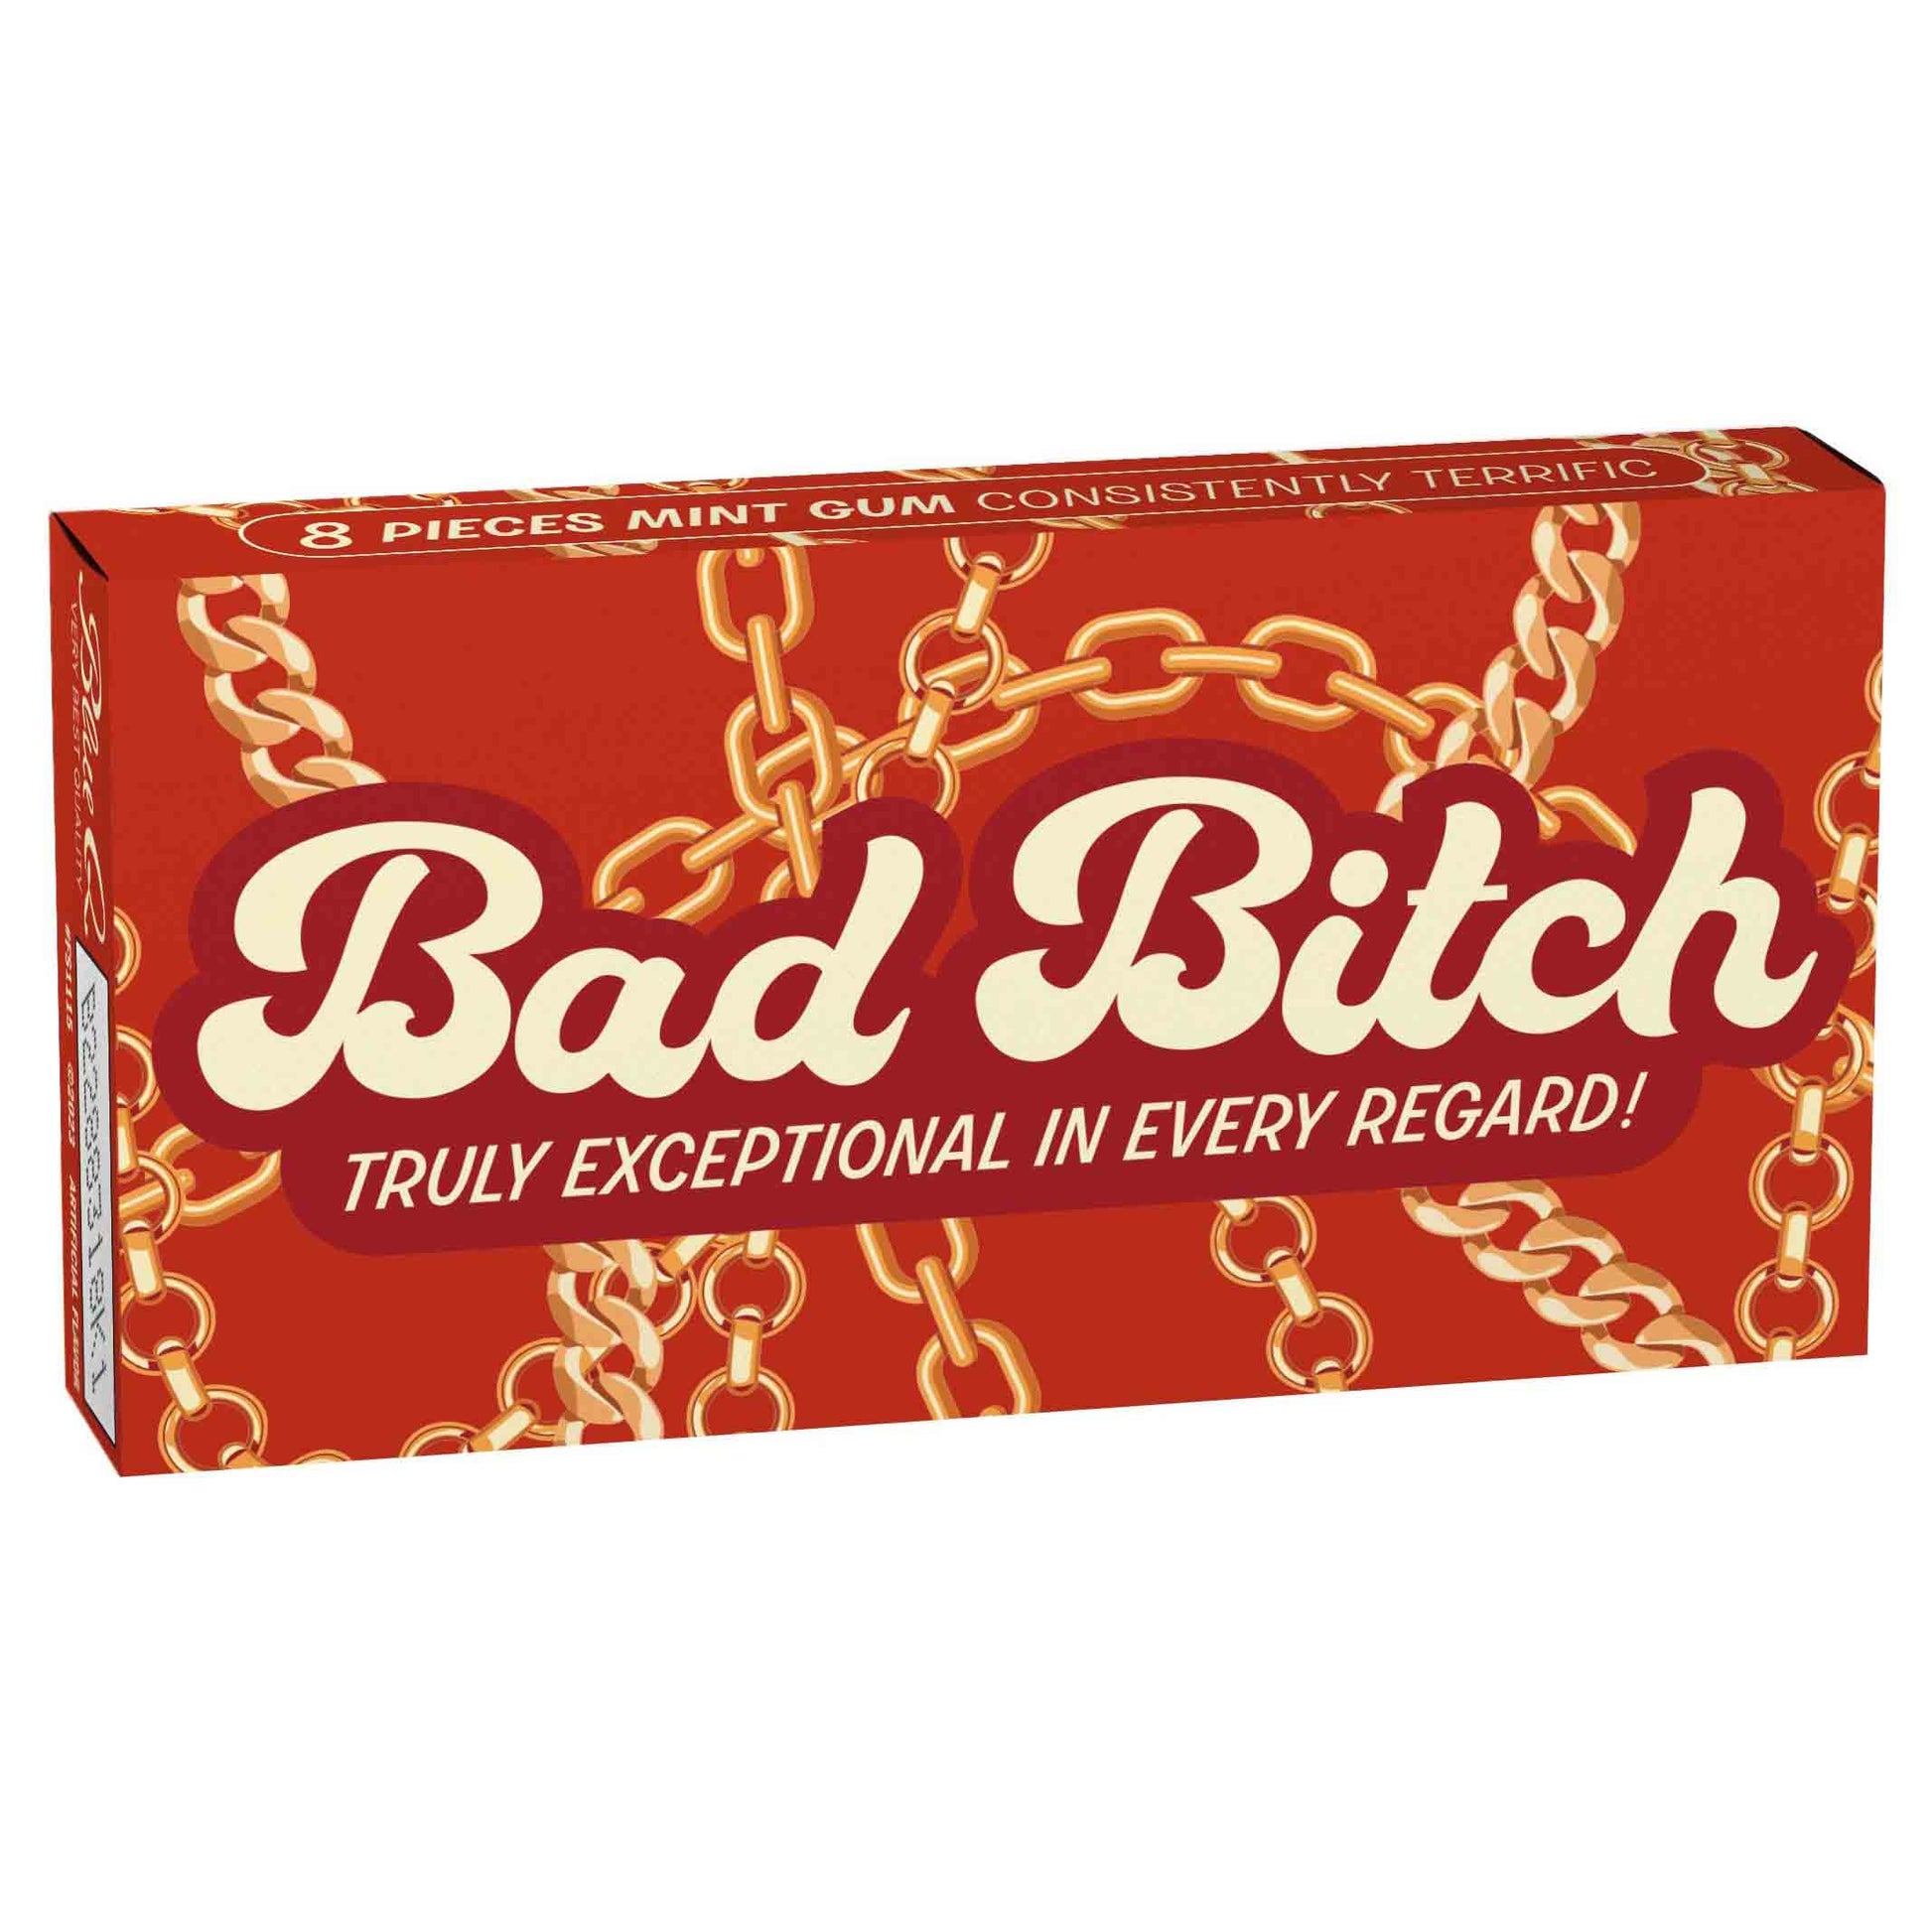 Bad Bitch Gum | Funny Mint Flavored Candy